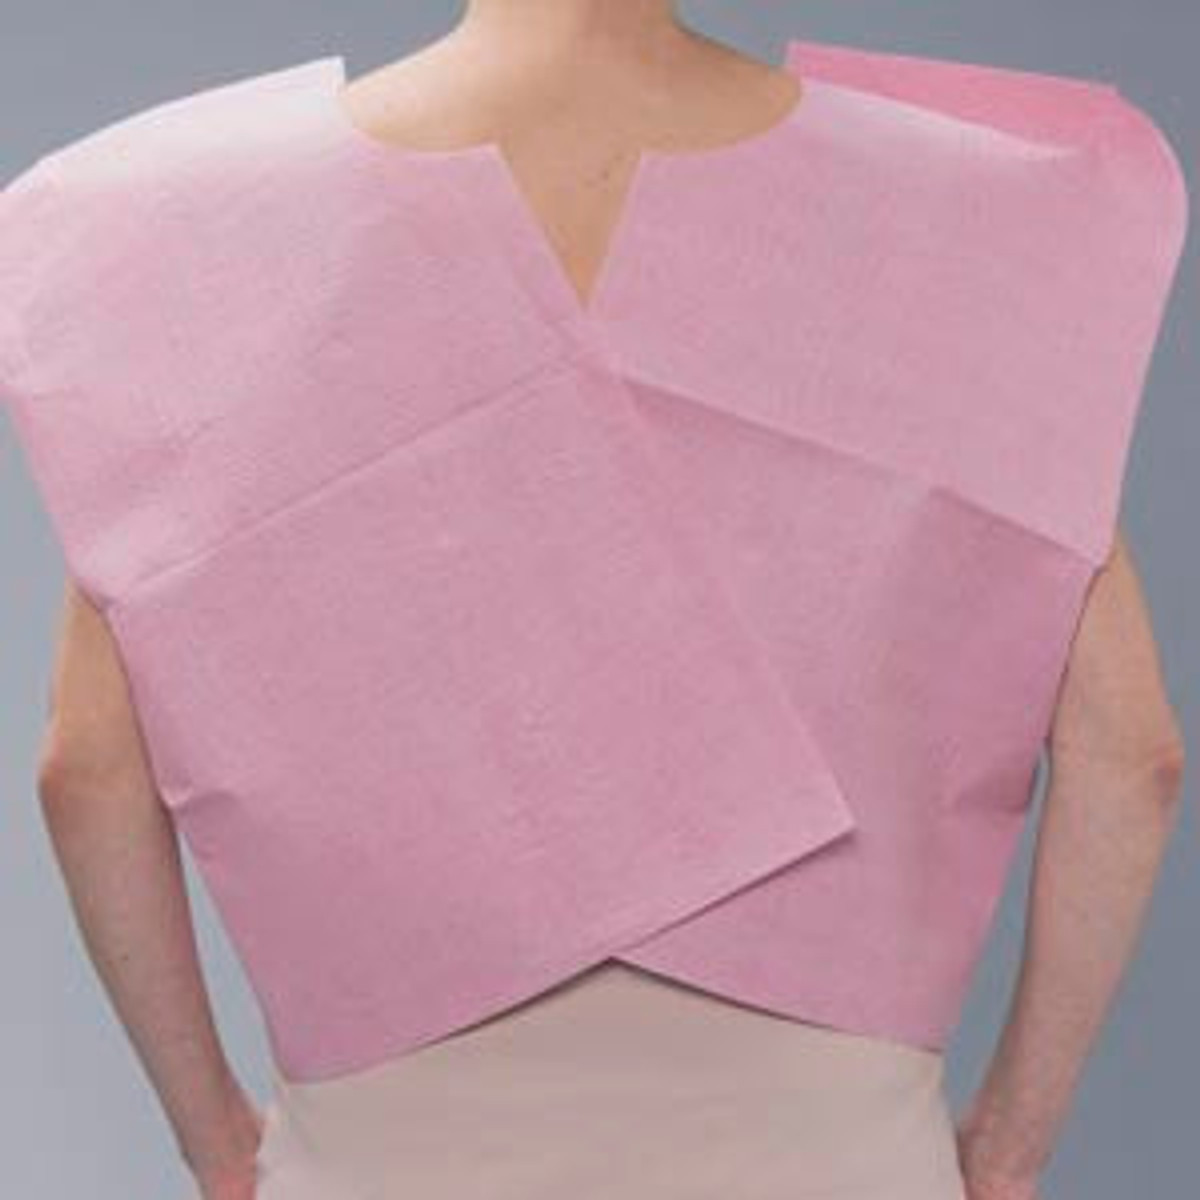 Tidi Choice Tissue/Poly/Tissue Patient Capes